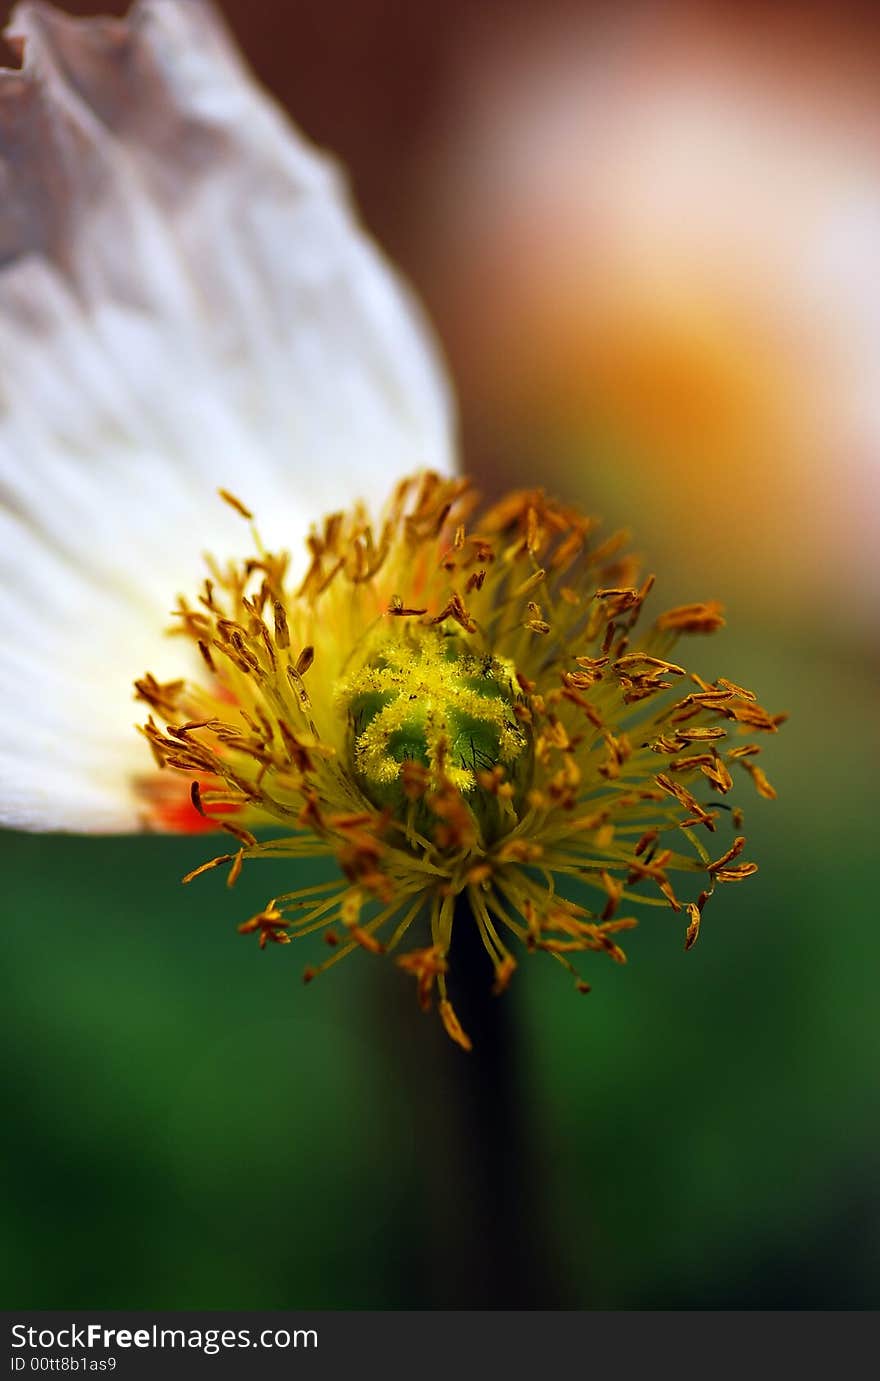 A withered poppy,Pistil, stamen and pollen of the poppy
means replace,but still power. A withered poppy,Pistil, stamen and pollen of the poppy
means replace,but still power